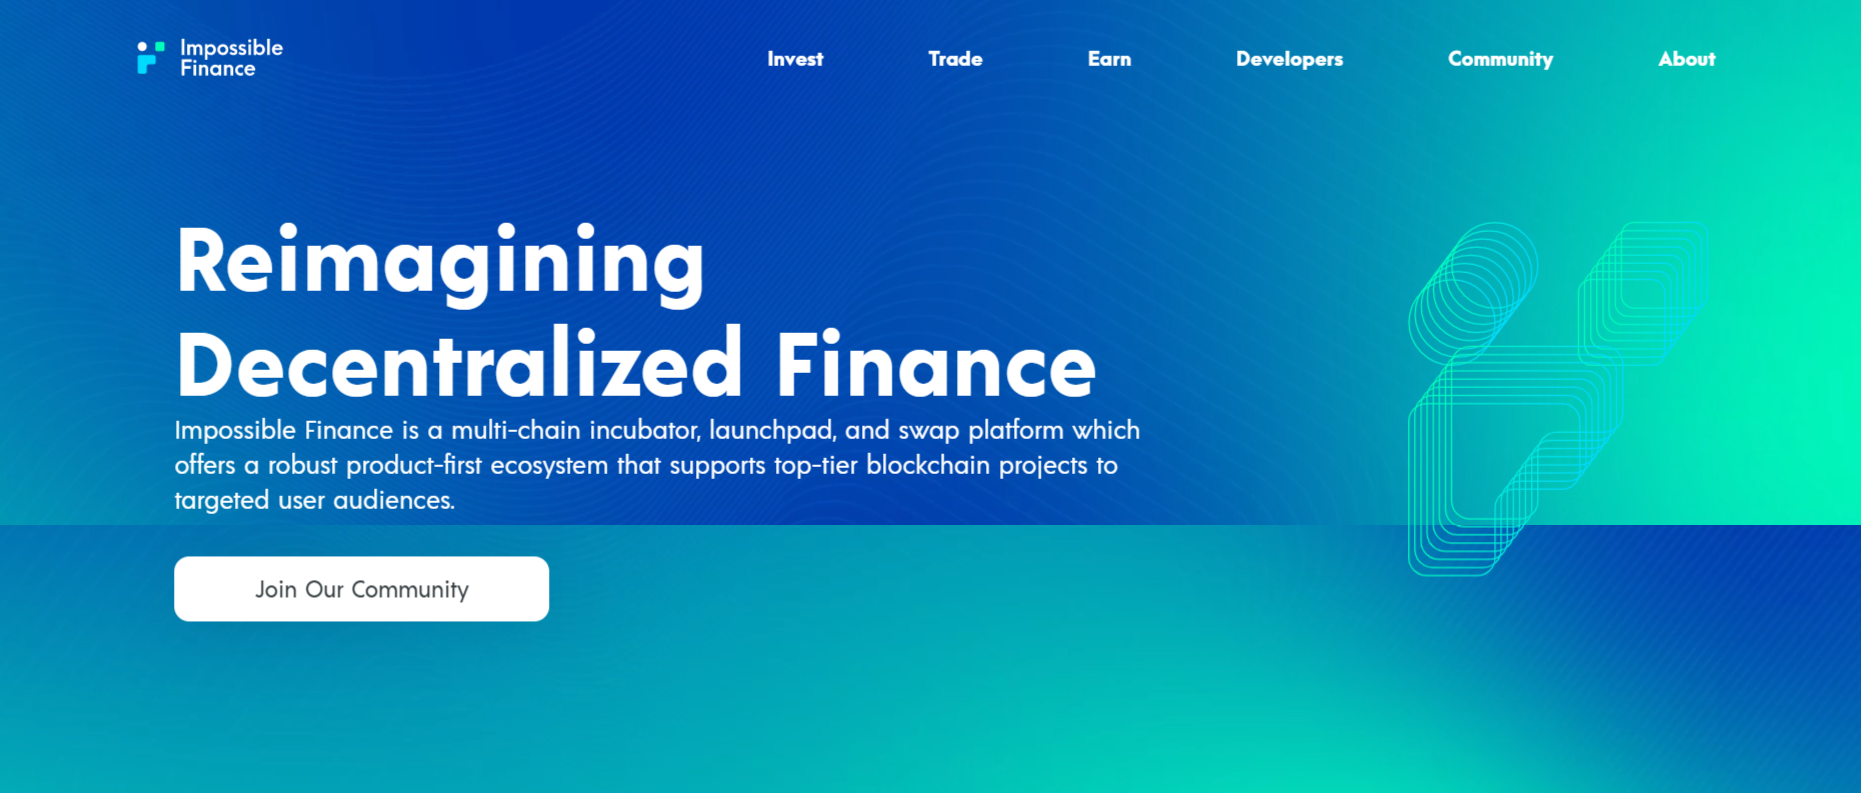 Initial DeFi ffering launchpad goes live on Impossible Finance